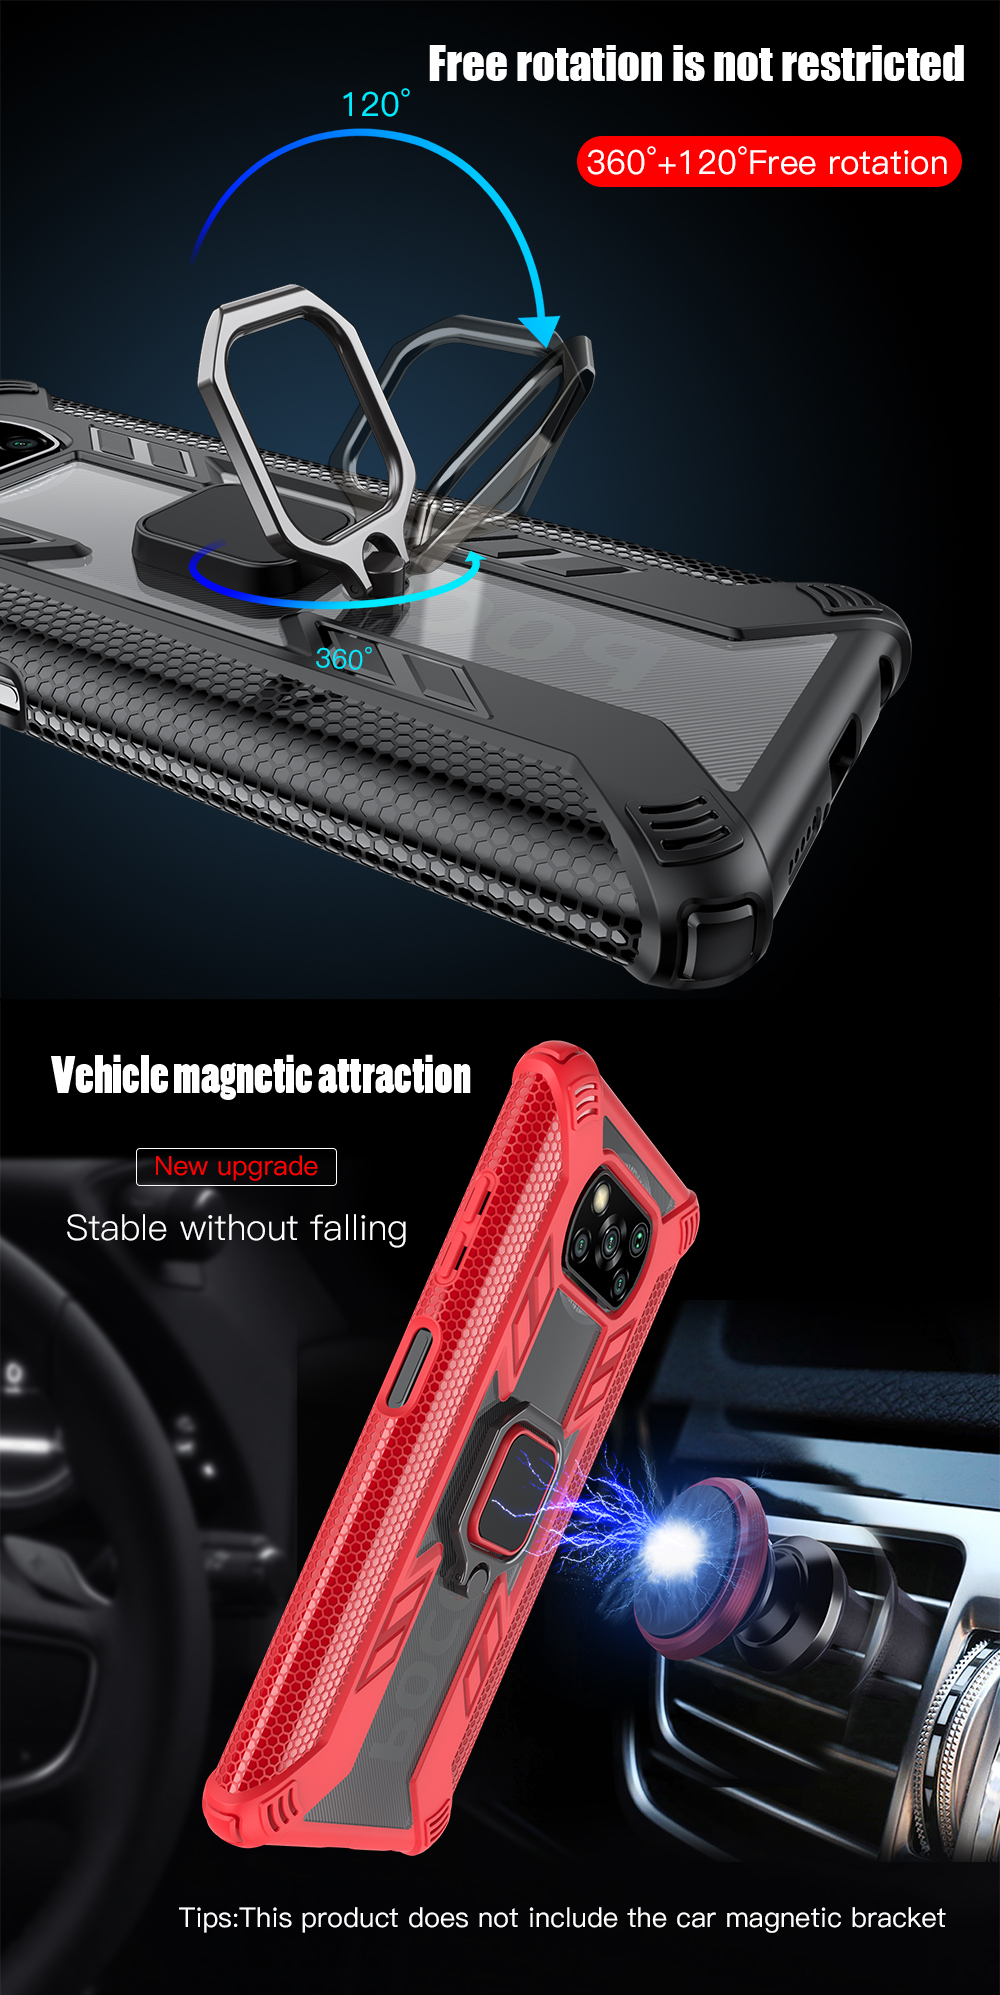 Bakeey-for-POCO-X3-PRO---POCO-X3-NFC-Case-Armor-Shockproof-Magnetic-with-360-Rotation-Finger-Ring-Ho-1758210-4